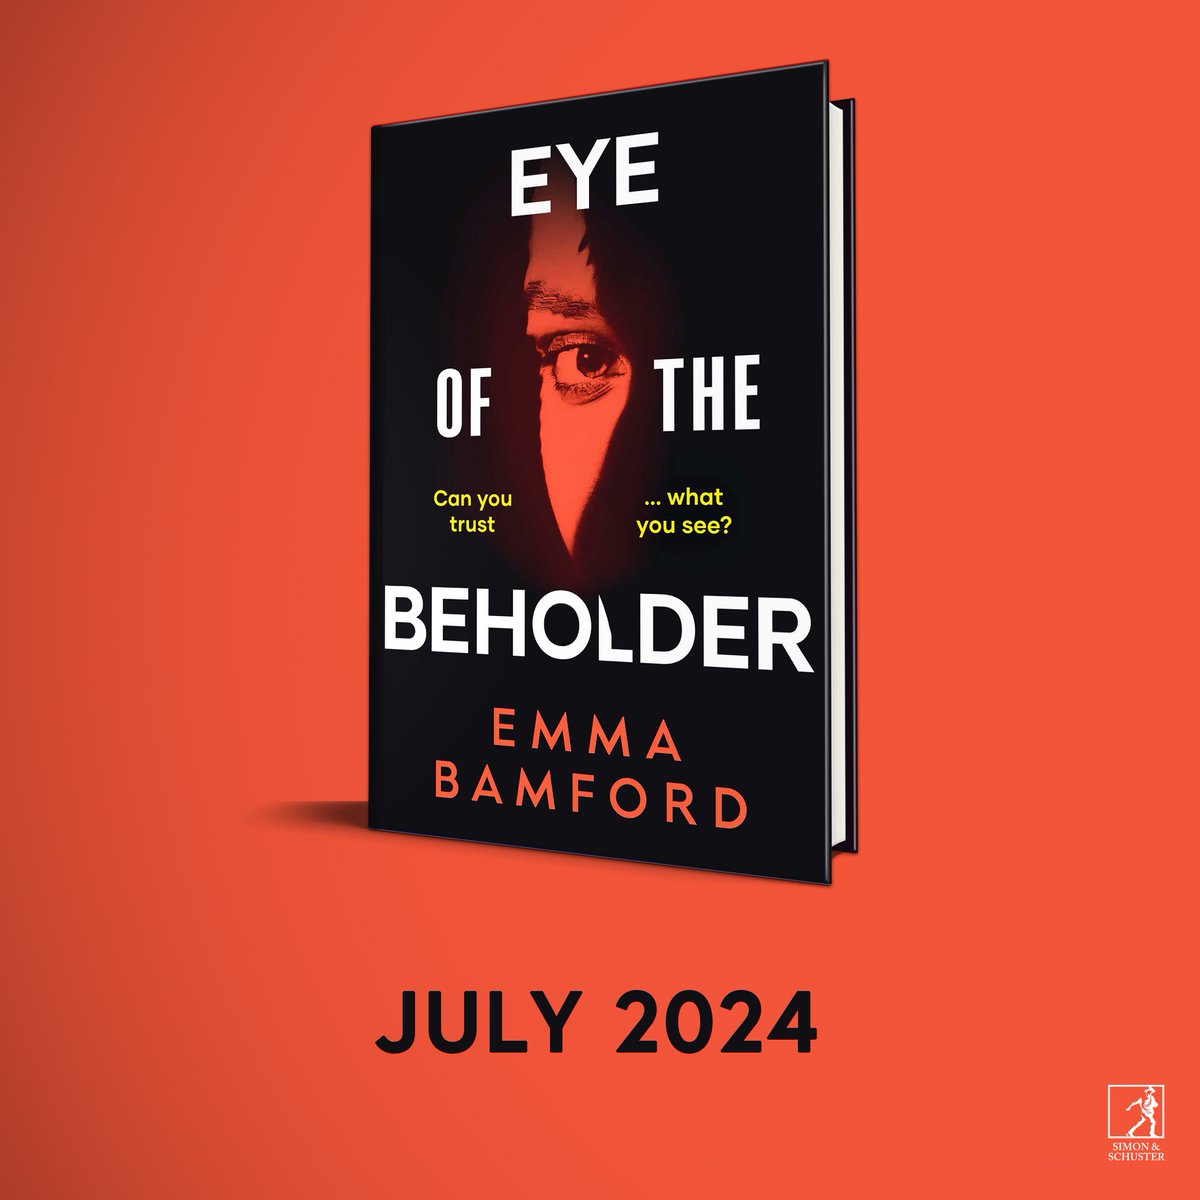 COVER REVEAL! My new psych suspense novel is out in July. If beauty is in the eye of the beholder, how much can you trust what you see? For more details & to pre-order, go to: simonandschuster.co.uk/books/Eye-of-t…